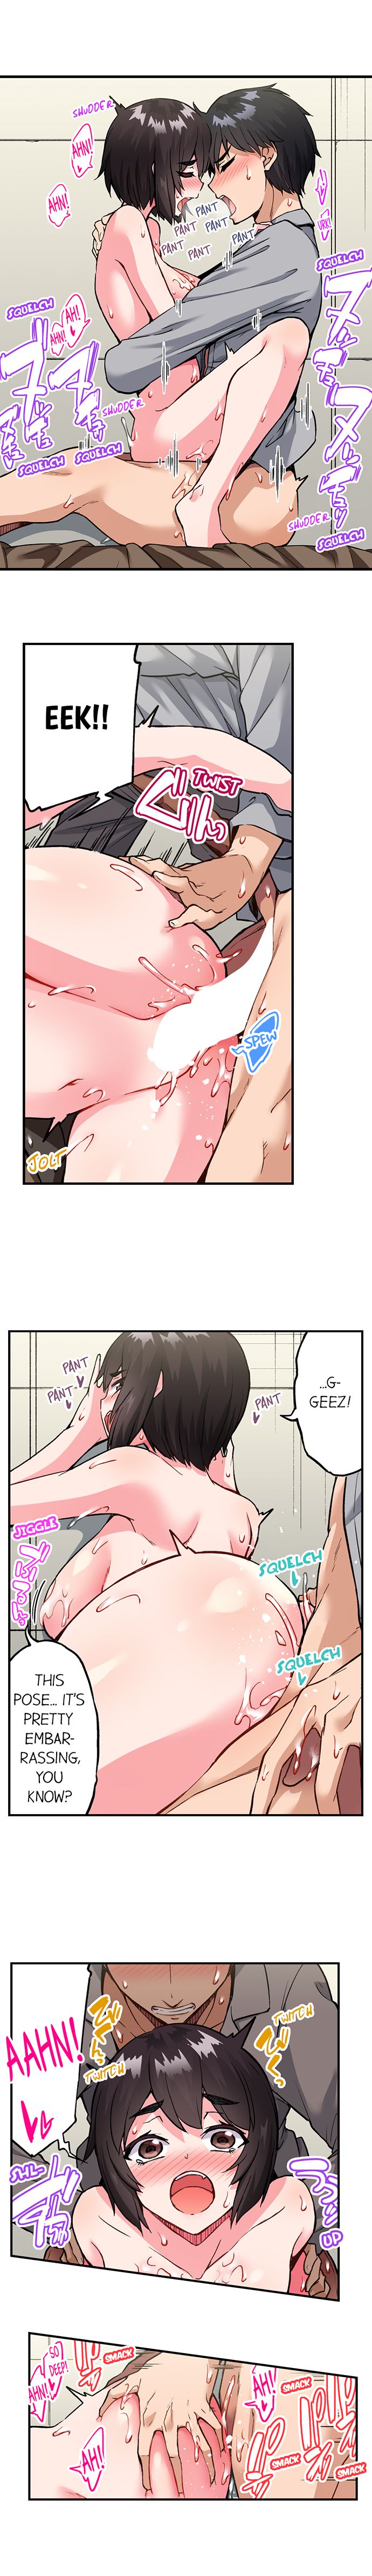 Traditional Job of Washing Girls’ Body - Chapter 176 Page 5